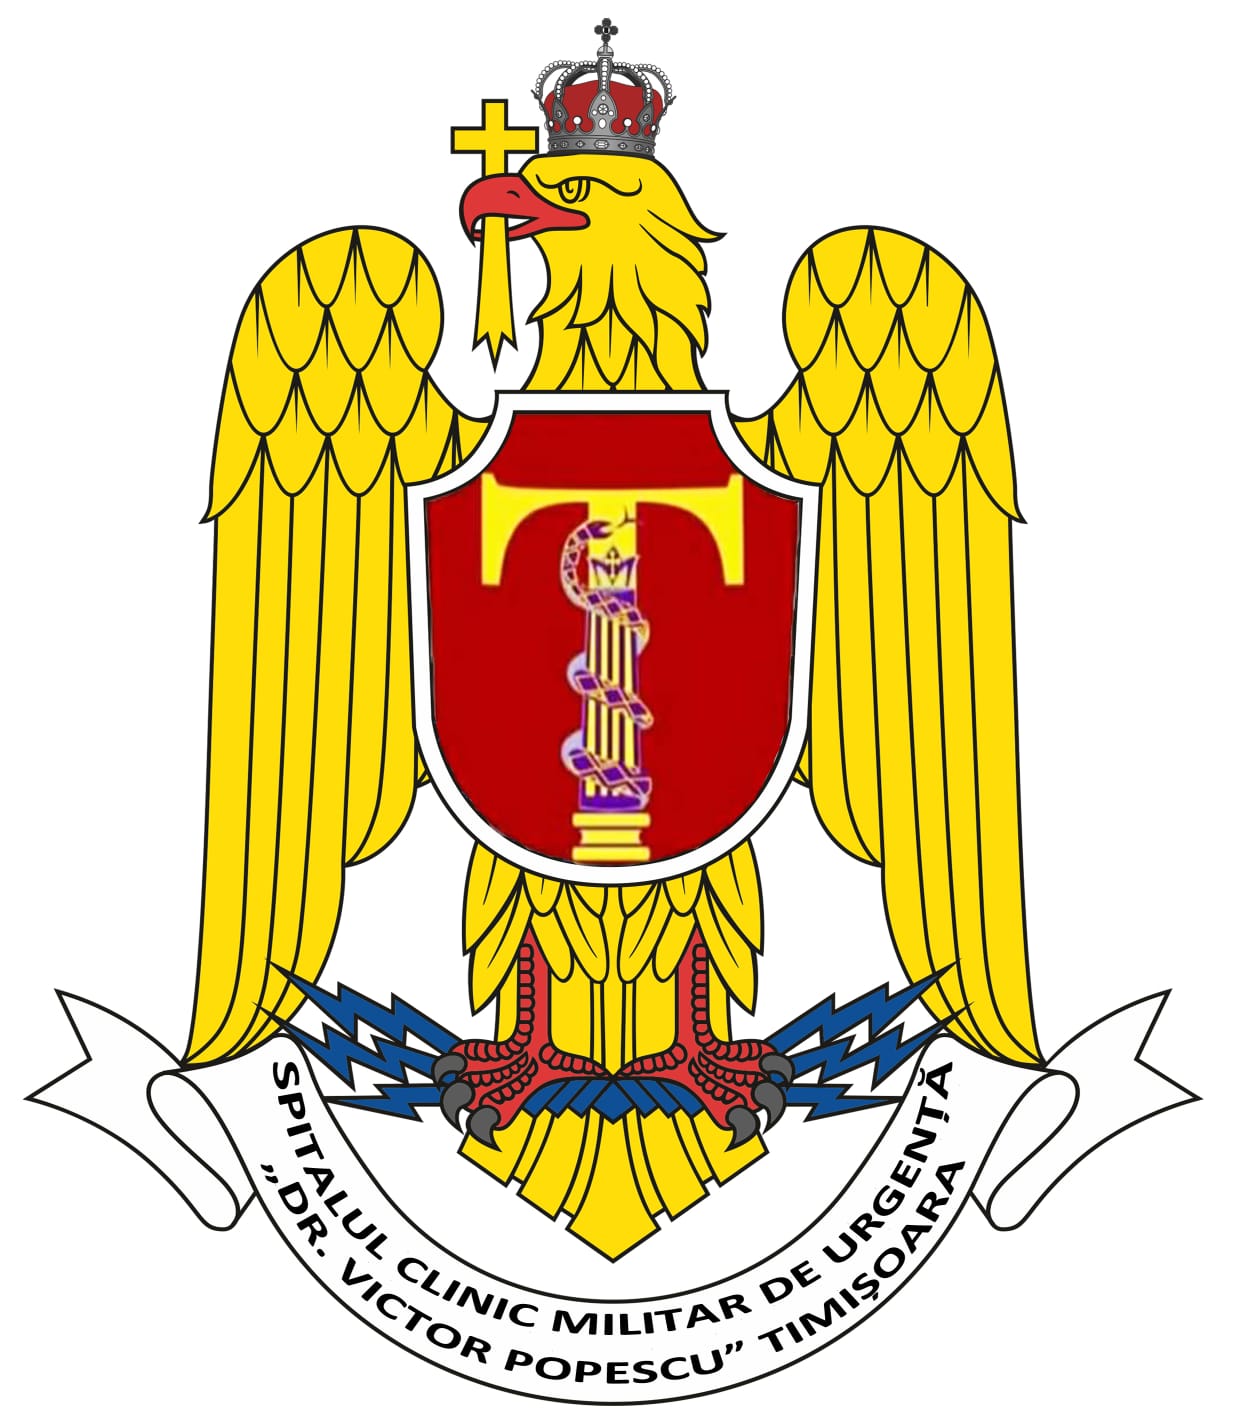 http://www.smutm.ro/images/heraldica.png